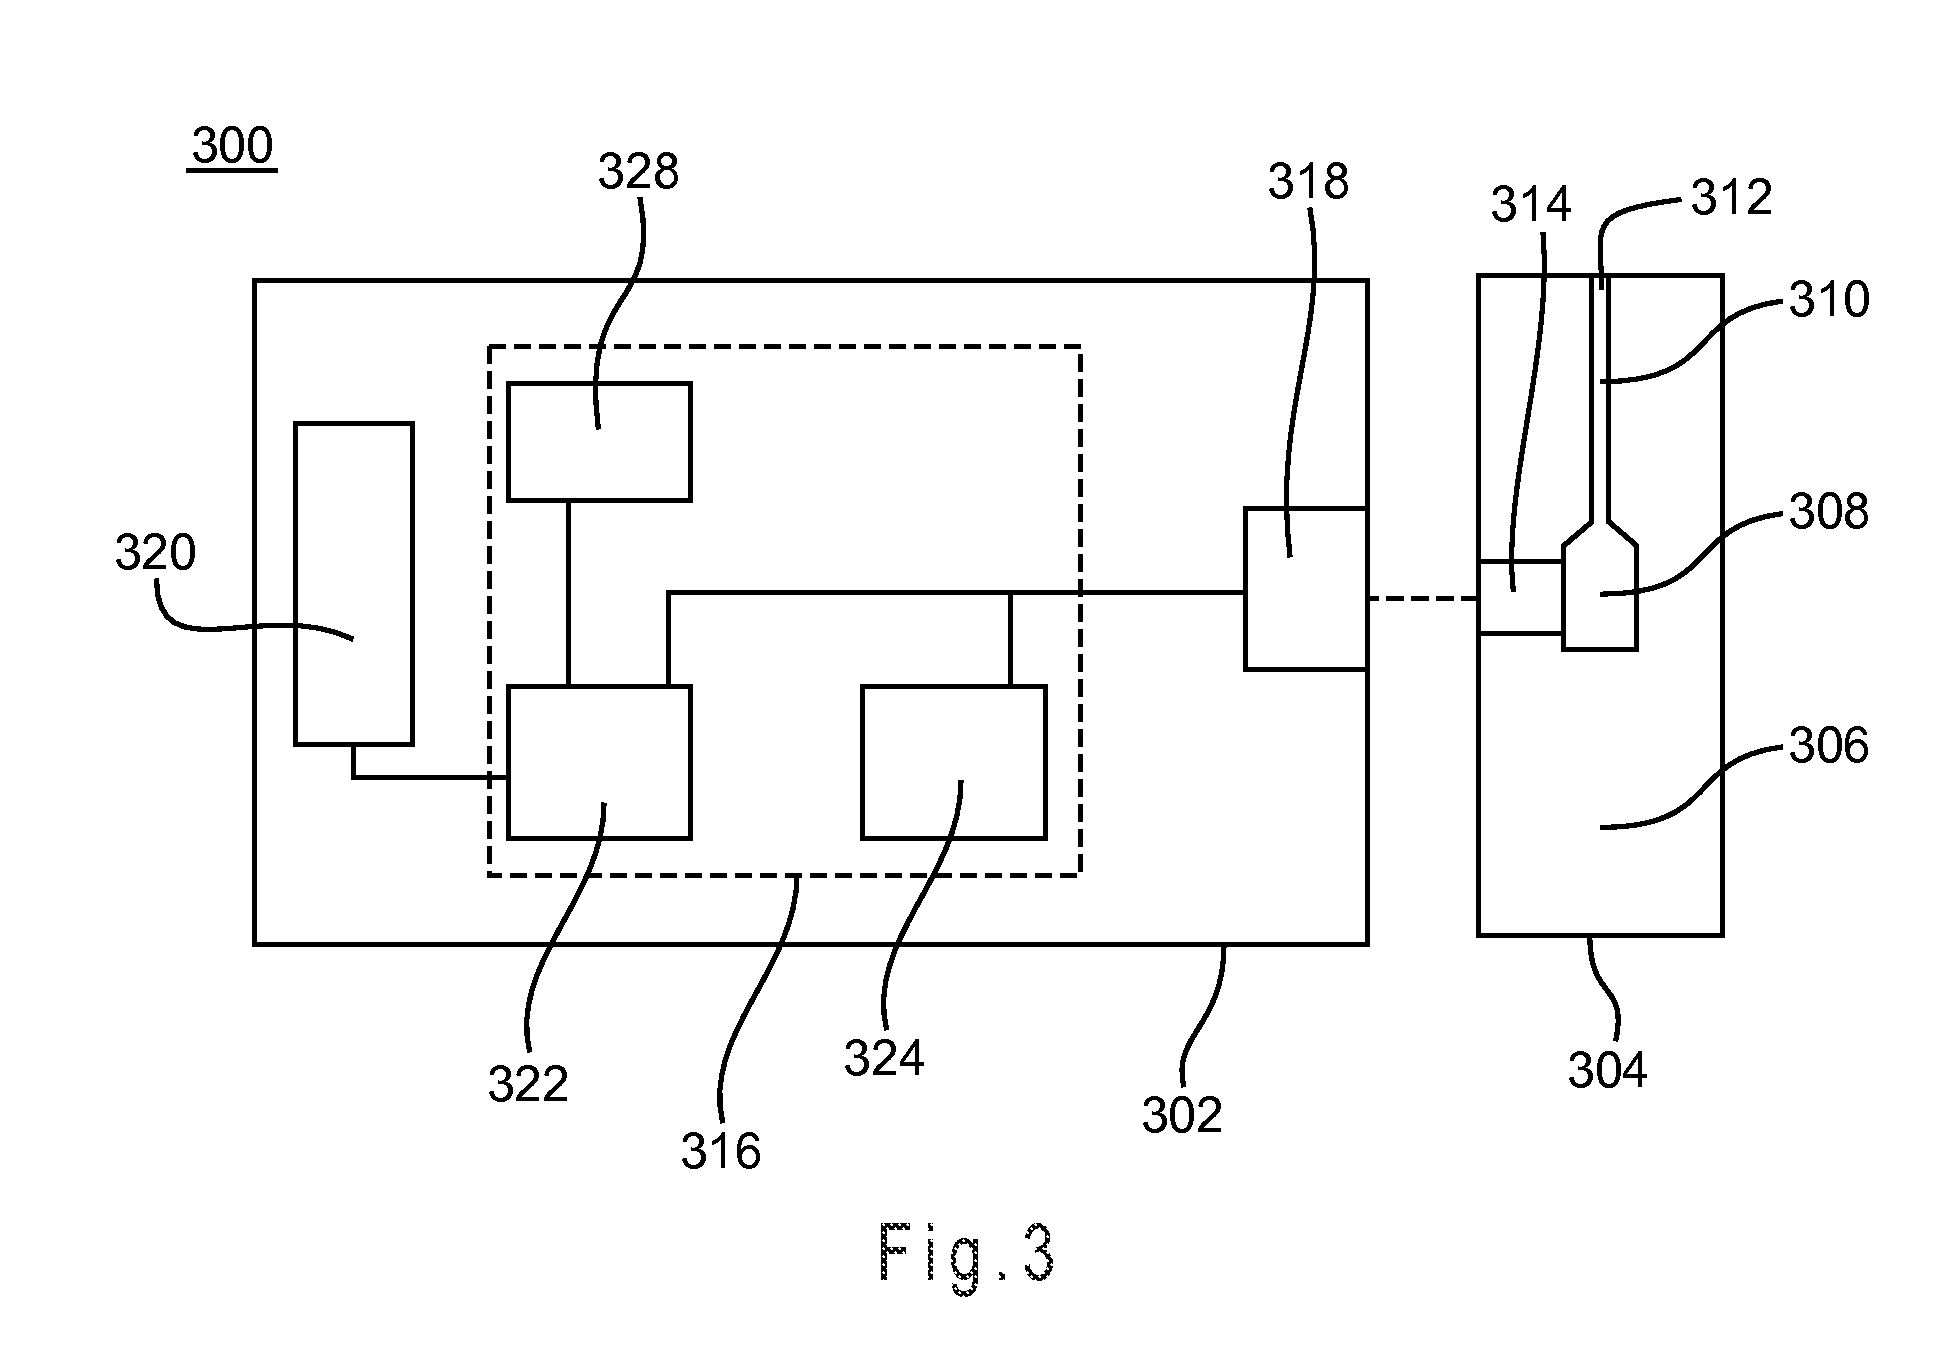 Abnormal Output Detection System For A Biosensor